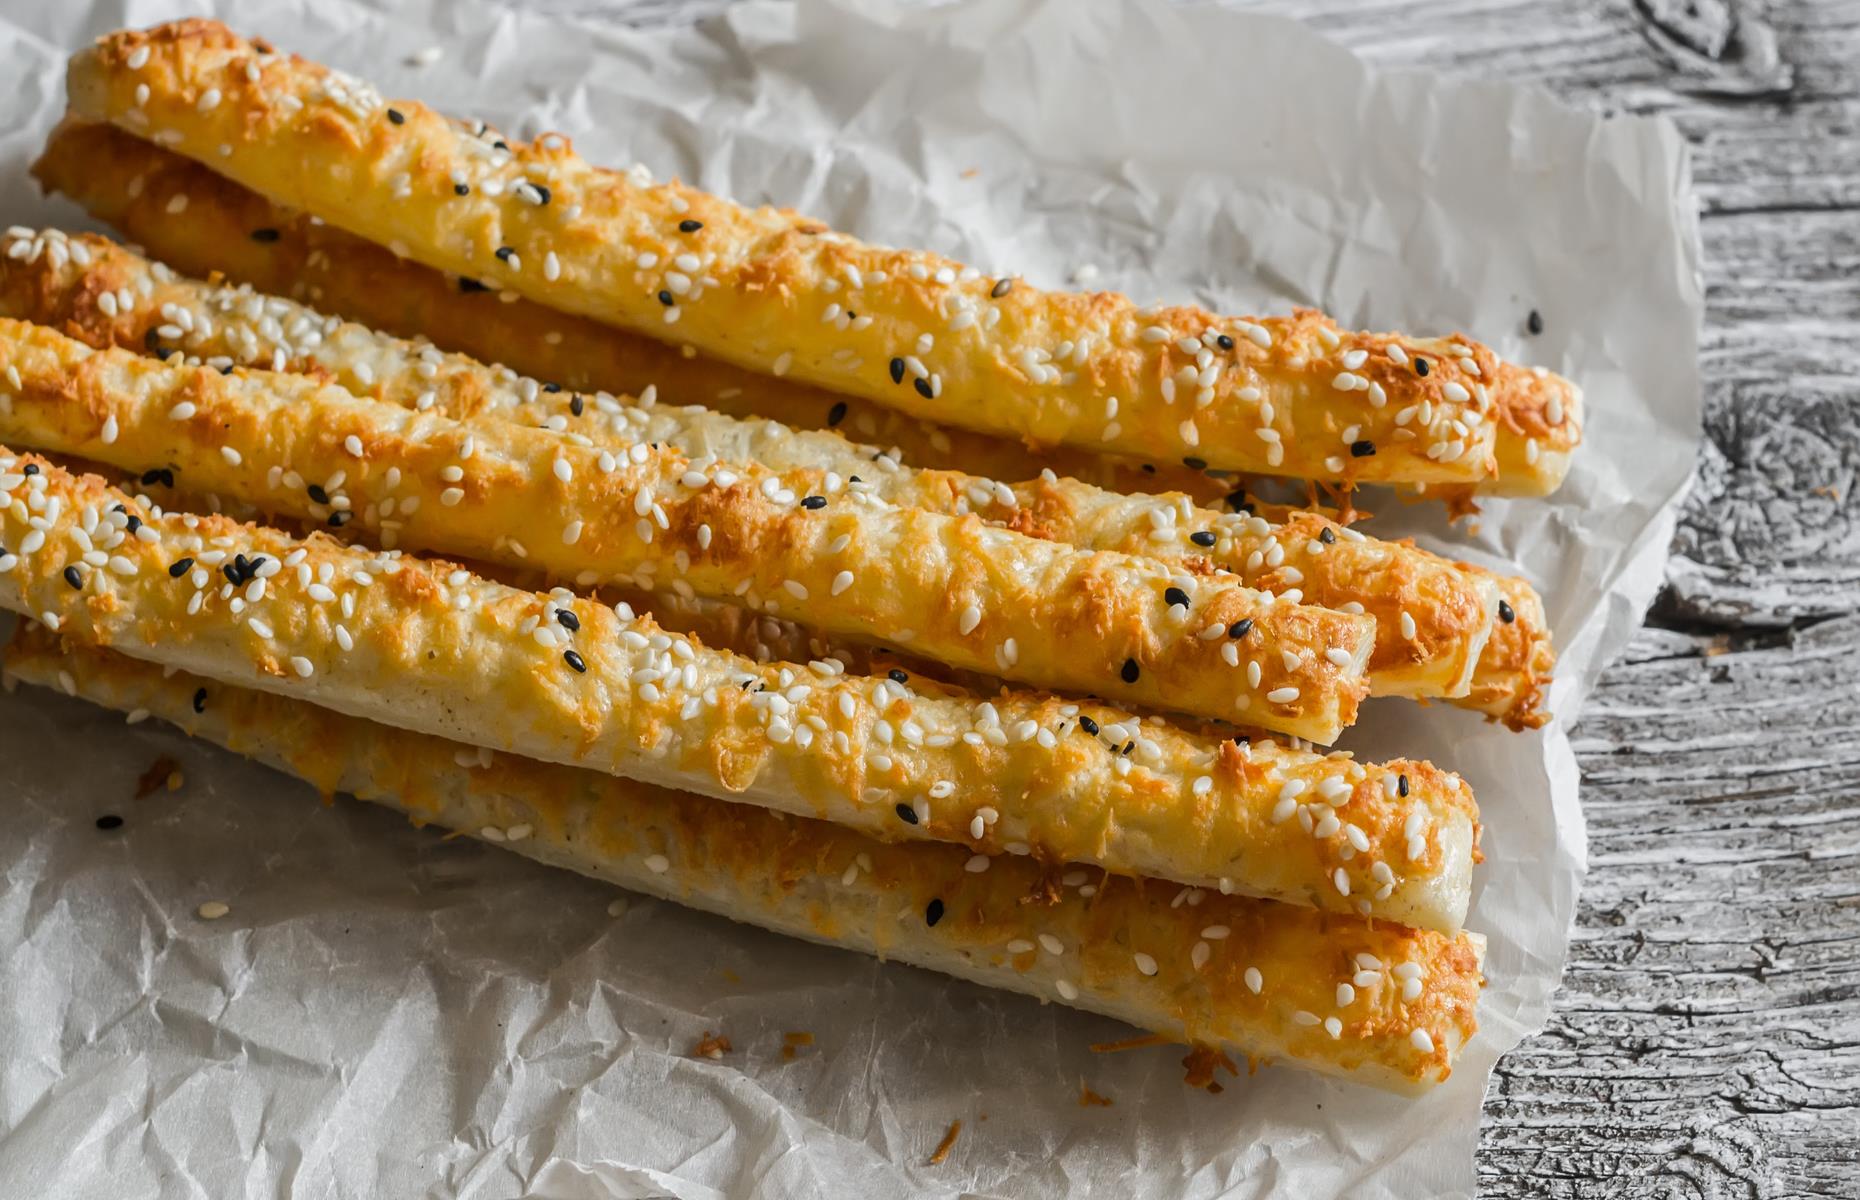 <p>Homemade breadsticks are far tastier than anything you’ll find in the shops and they’re also easy to make. Our recipe gives you two options: one is Indian-inspired and features spices, seeds, and sultanas, and the other is made with Parmesan and basil. Breadsticks are best eaten on the day they're made, but you can freeze them once cooked and reheat in a hot oven.</p>  <p><a href="https://www.lovefood.com/recipes/56981/tikka-masala-breadsticks-recipe"><strong>Get the recipe for breadsticks here</strong></a></p>